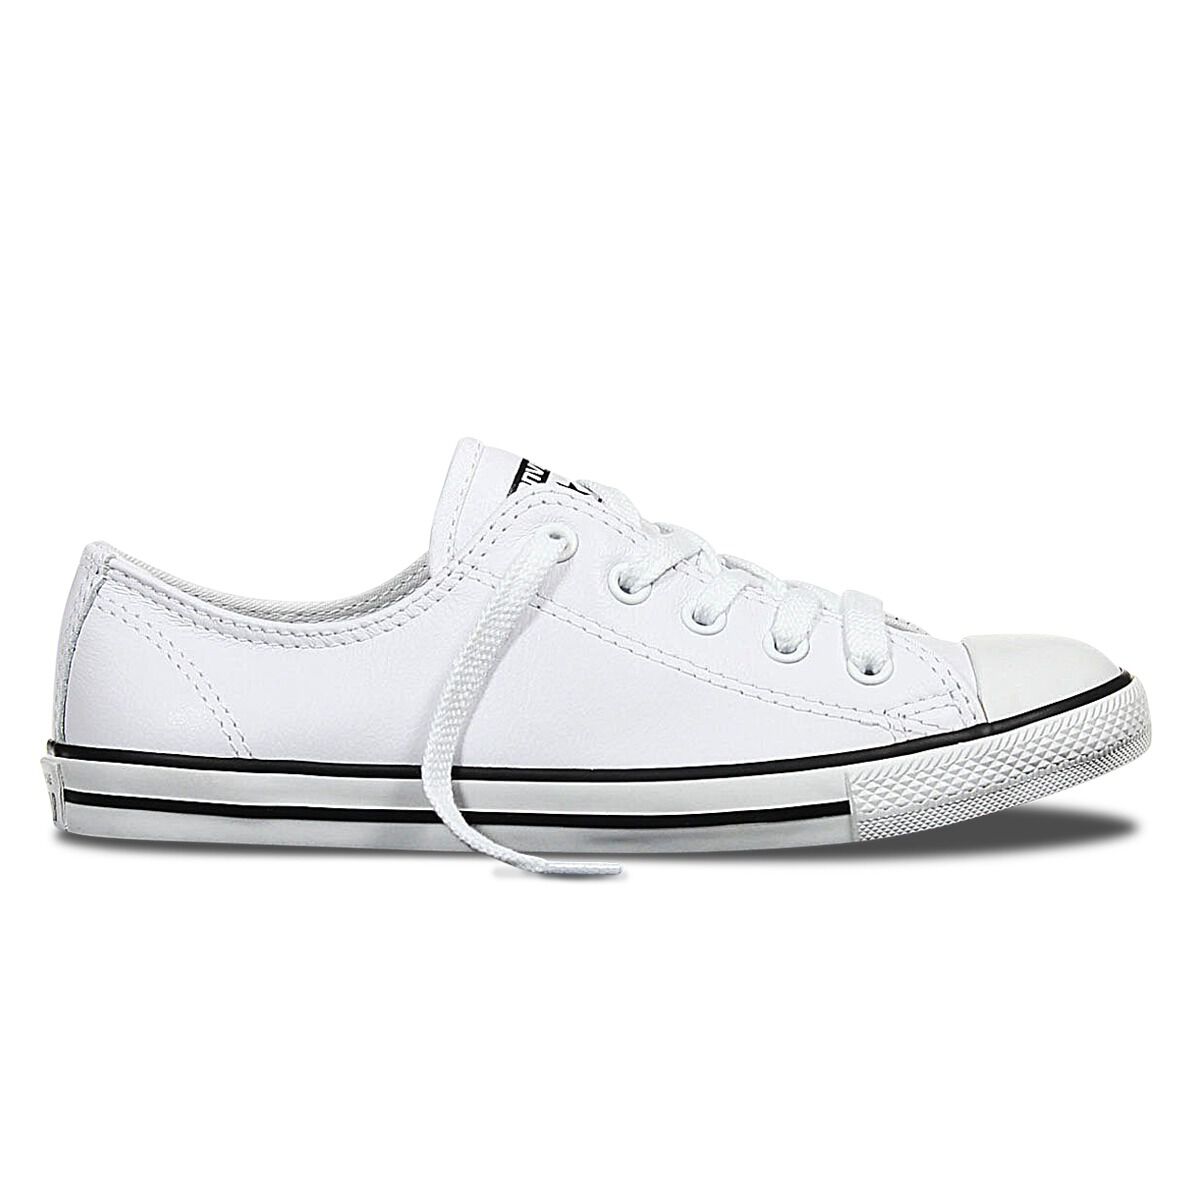 white leather womens tennis shoes